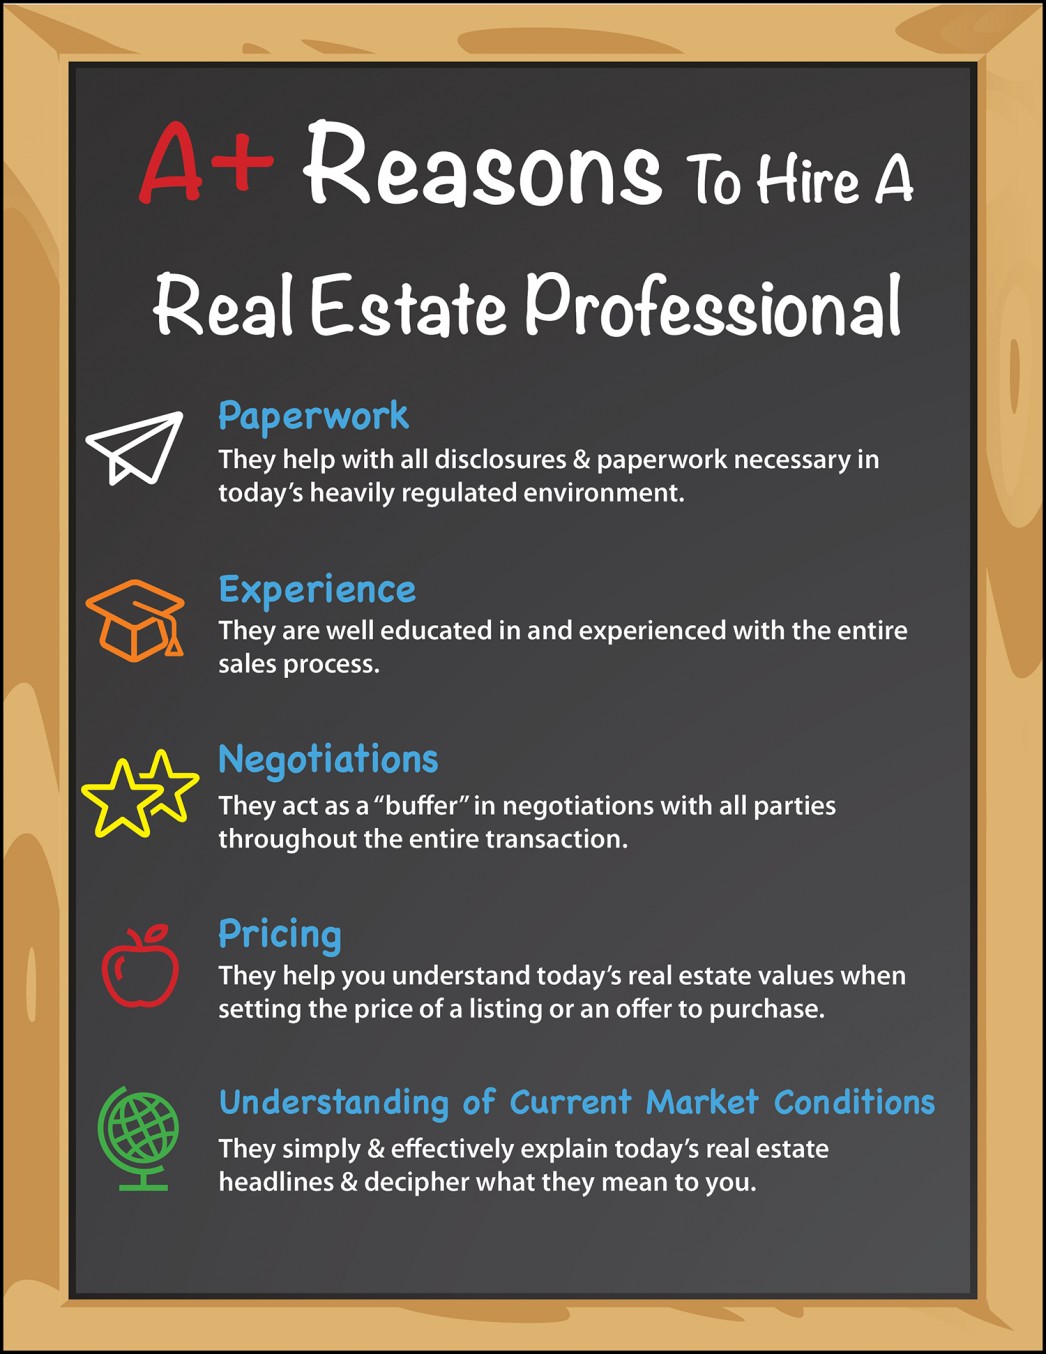 Want to Get an A? Hire A Real Estate Pro [INFOGRAPHIC] | MyKCM